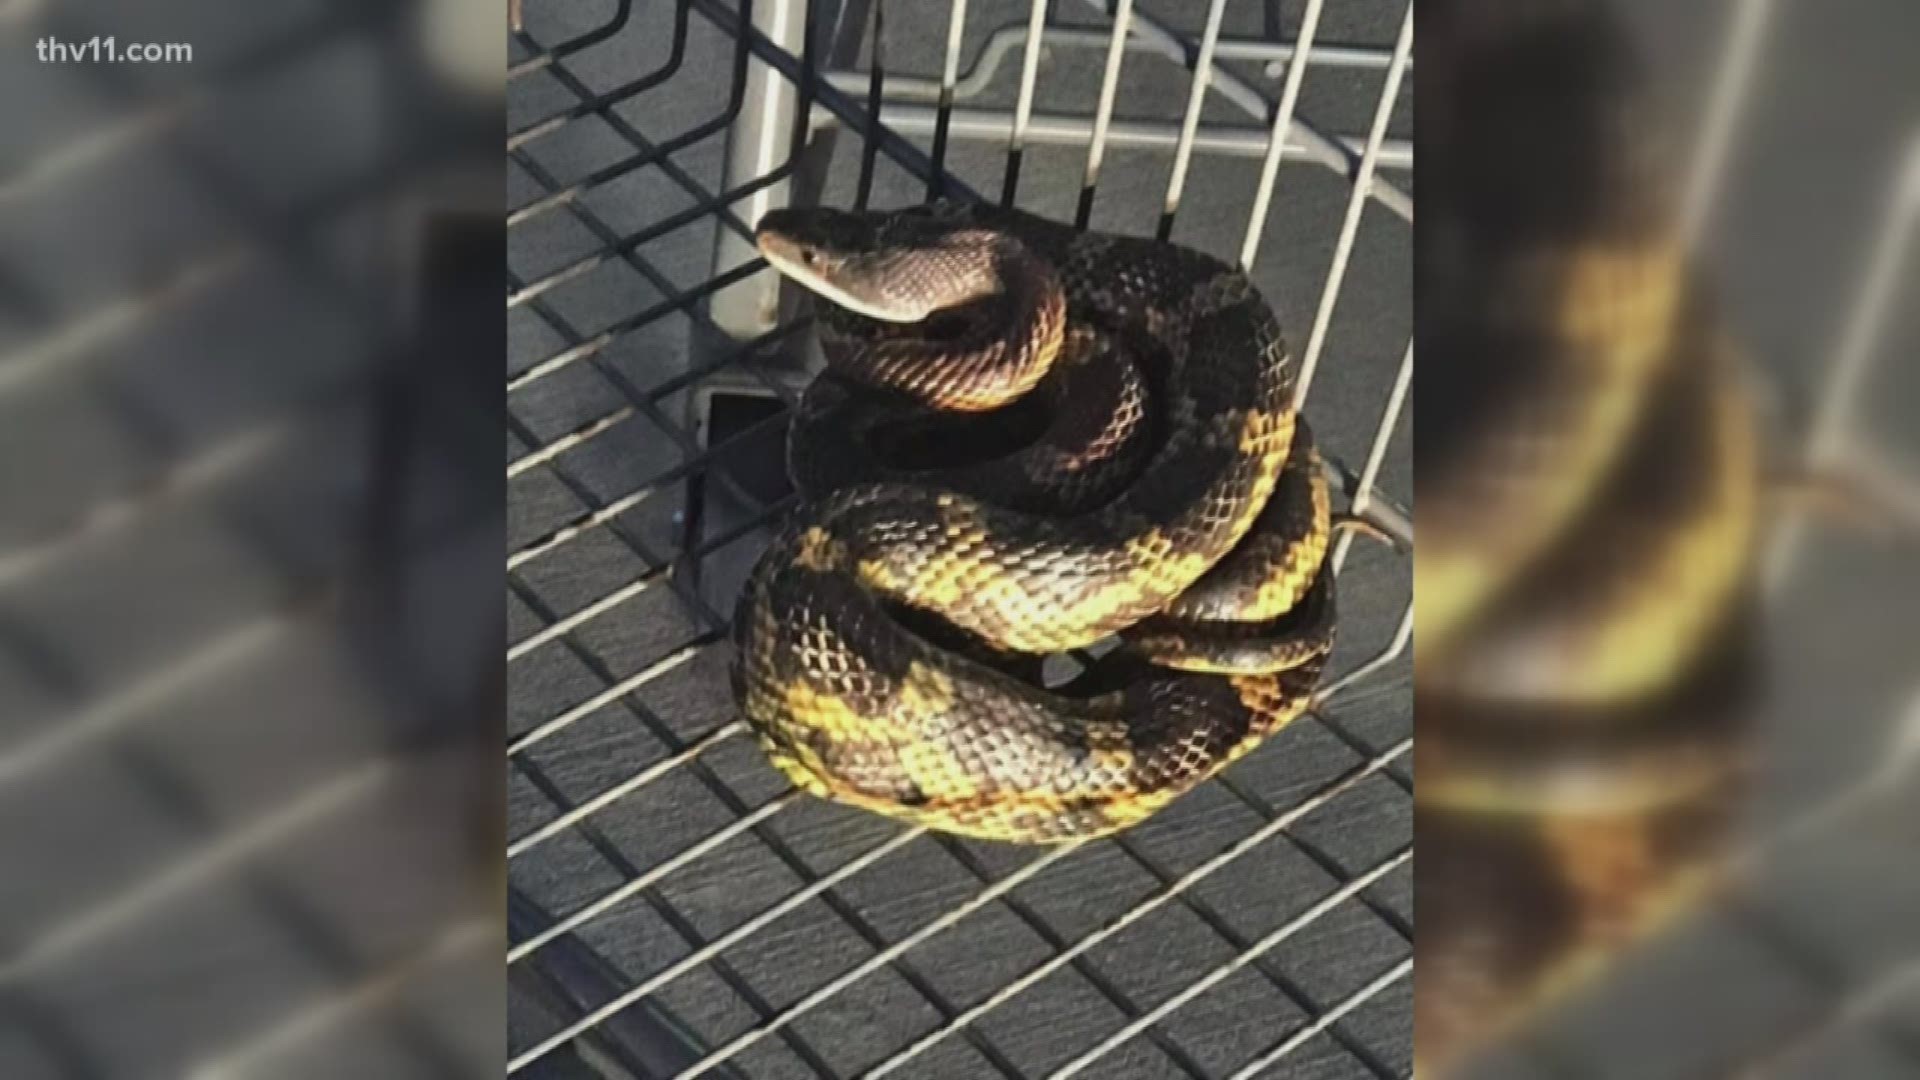 Well another reason to be careful when you go shopping police in Texas find a snake in a Walmart shopping cart.